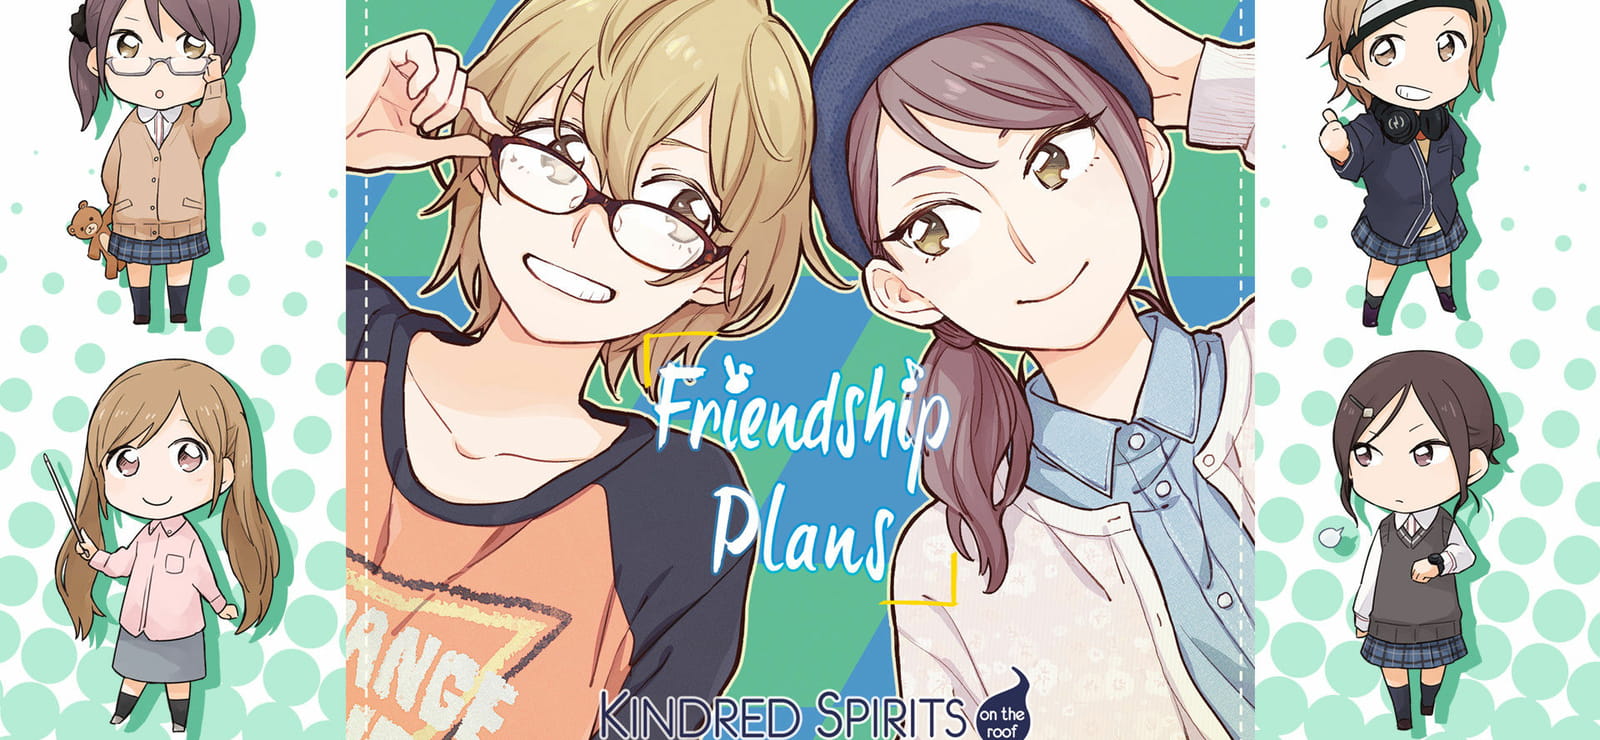 Kindred Spirits On The Roof Drama CD Vol.2